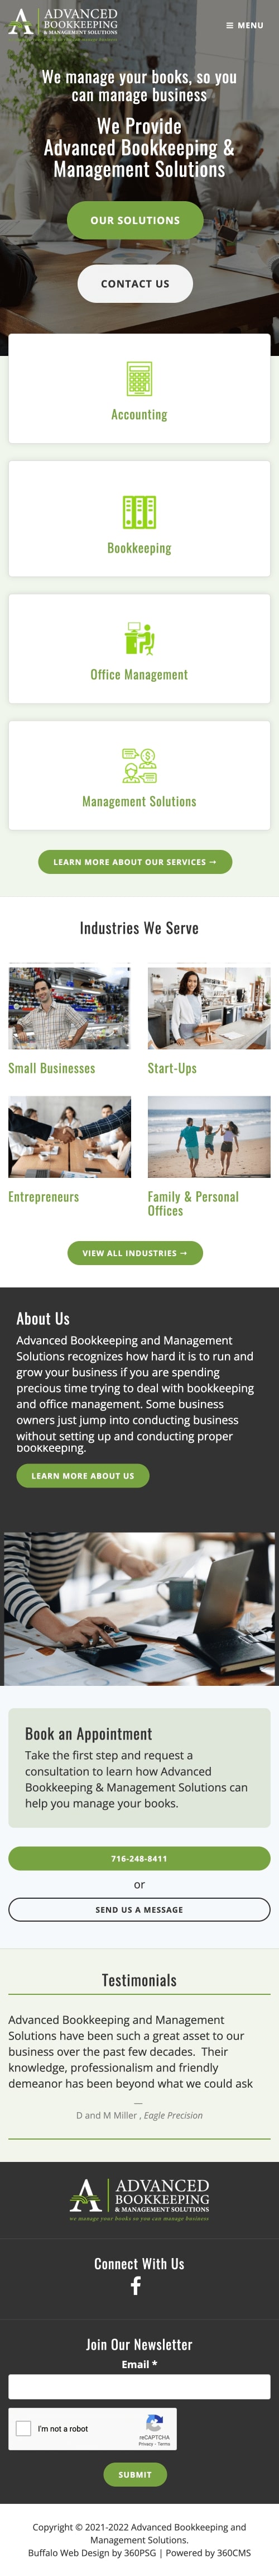 Advanced Bookkeeping & Management Solutions Website - Mobile